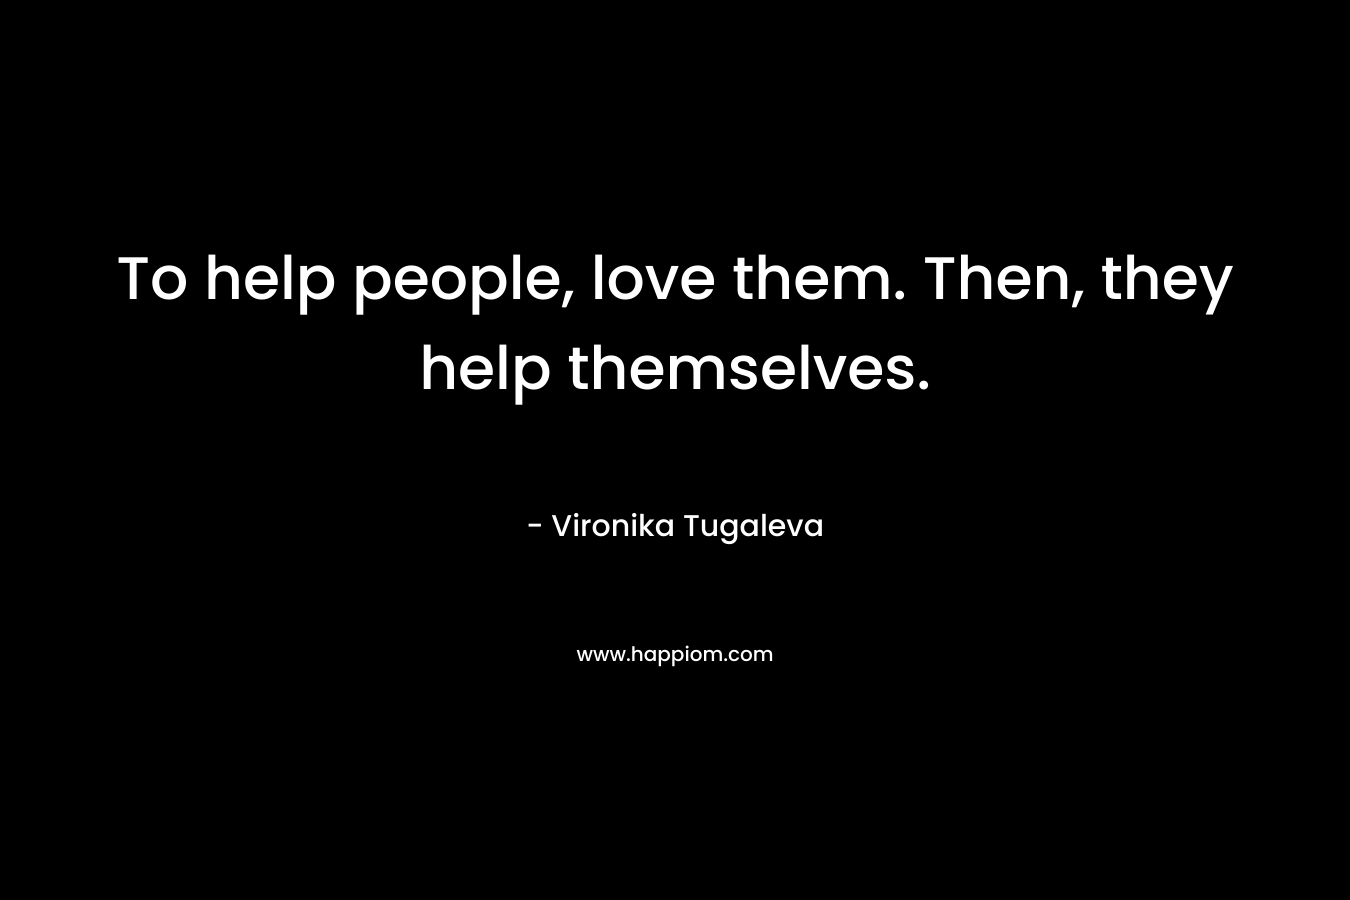 To help people, love them. Then, they help themselves.